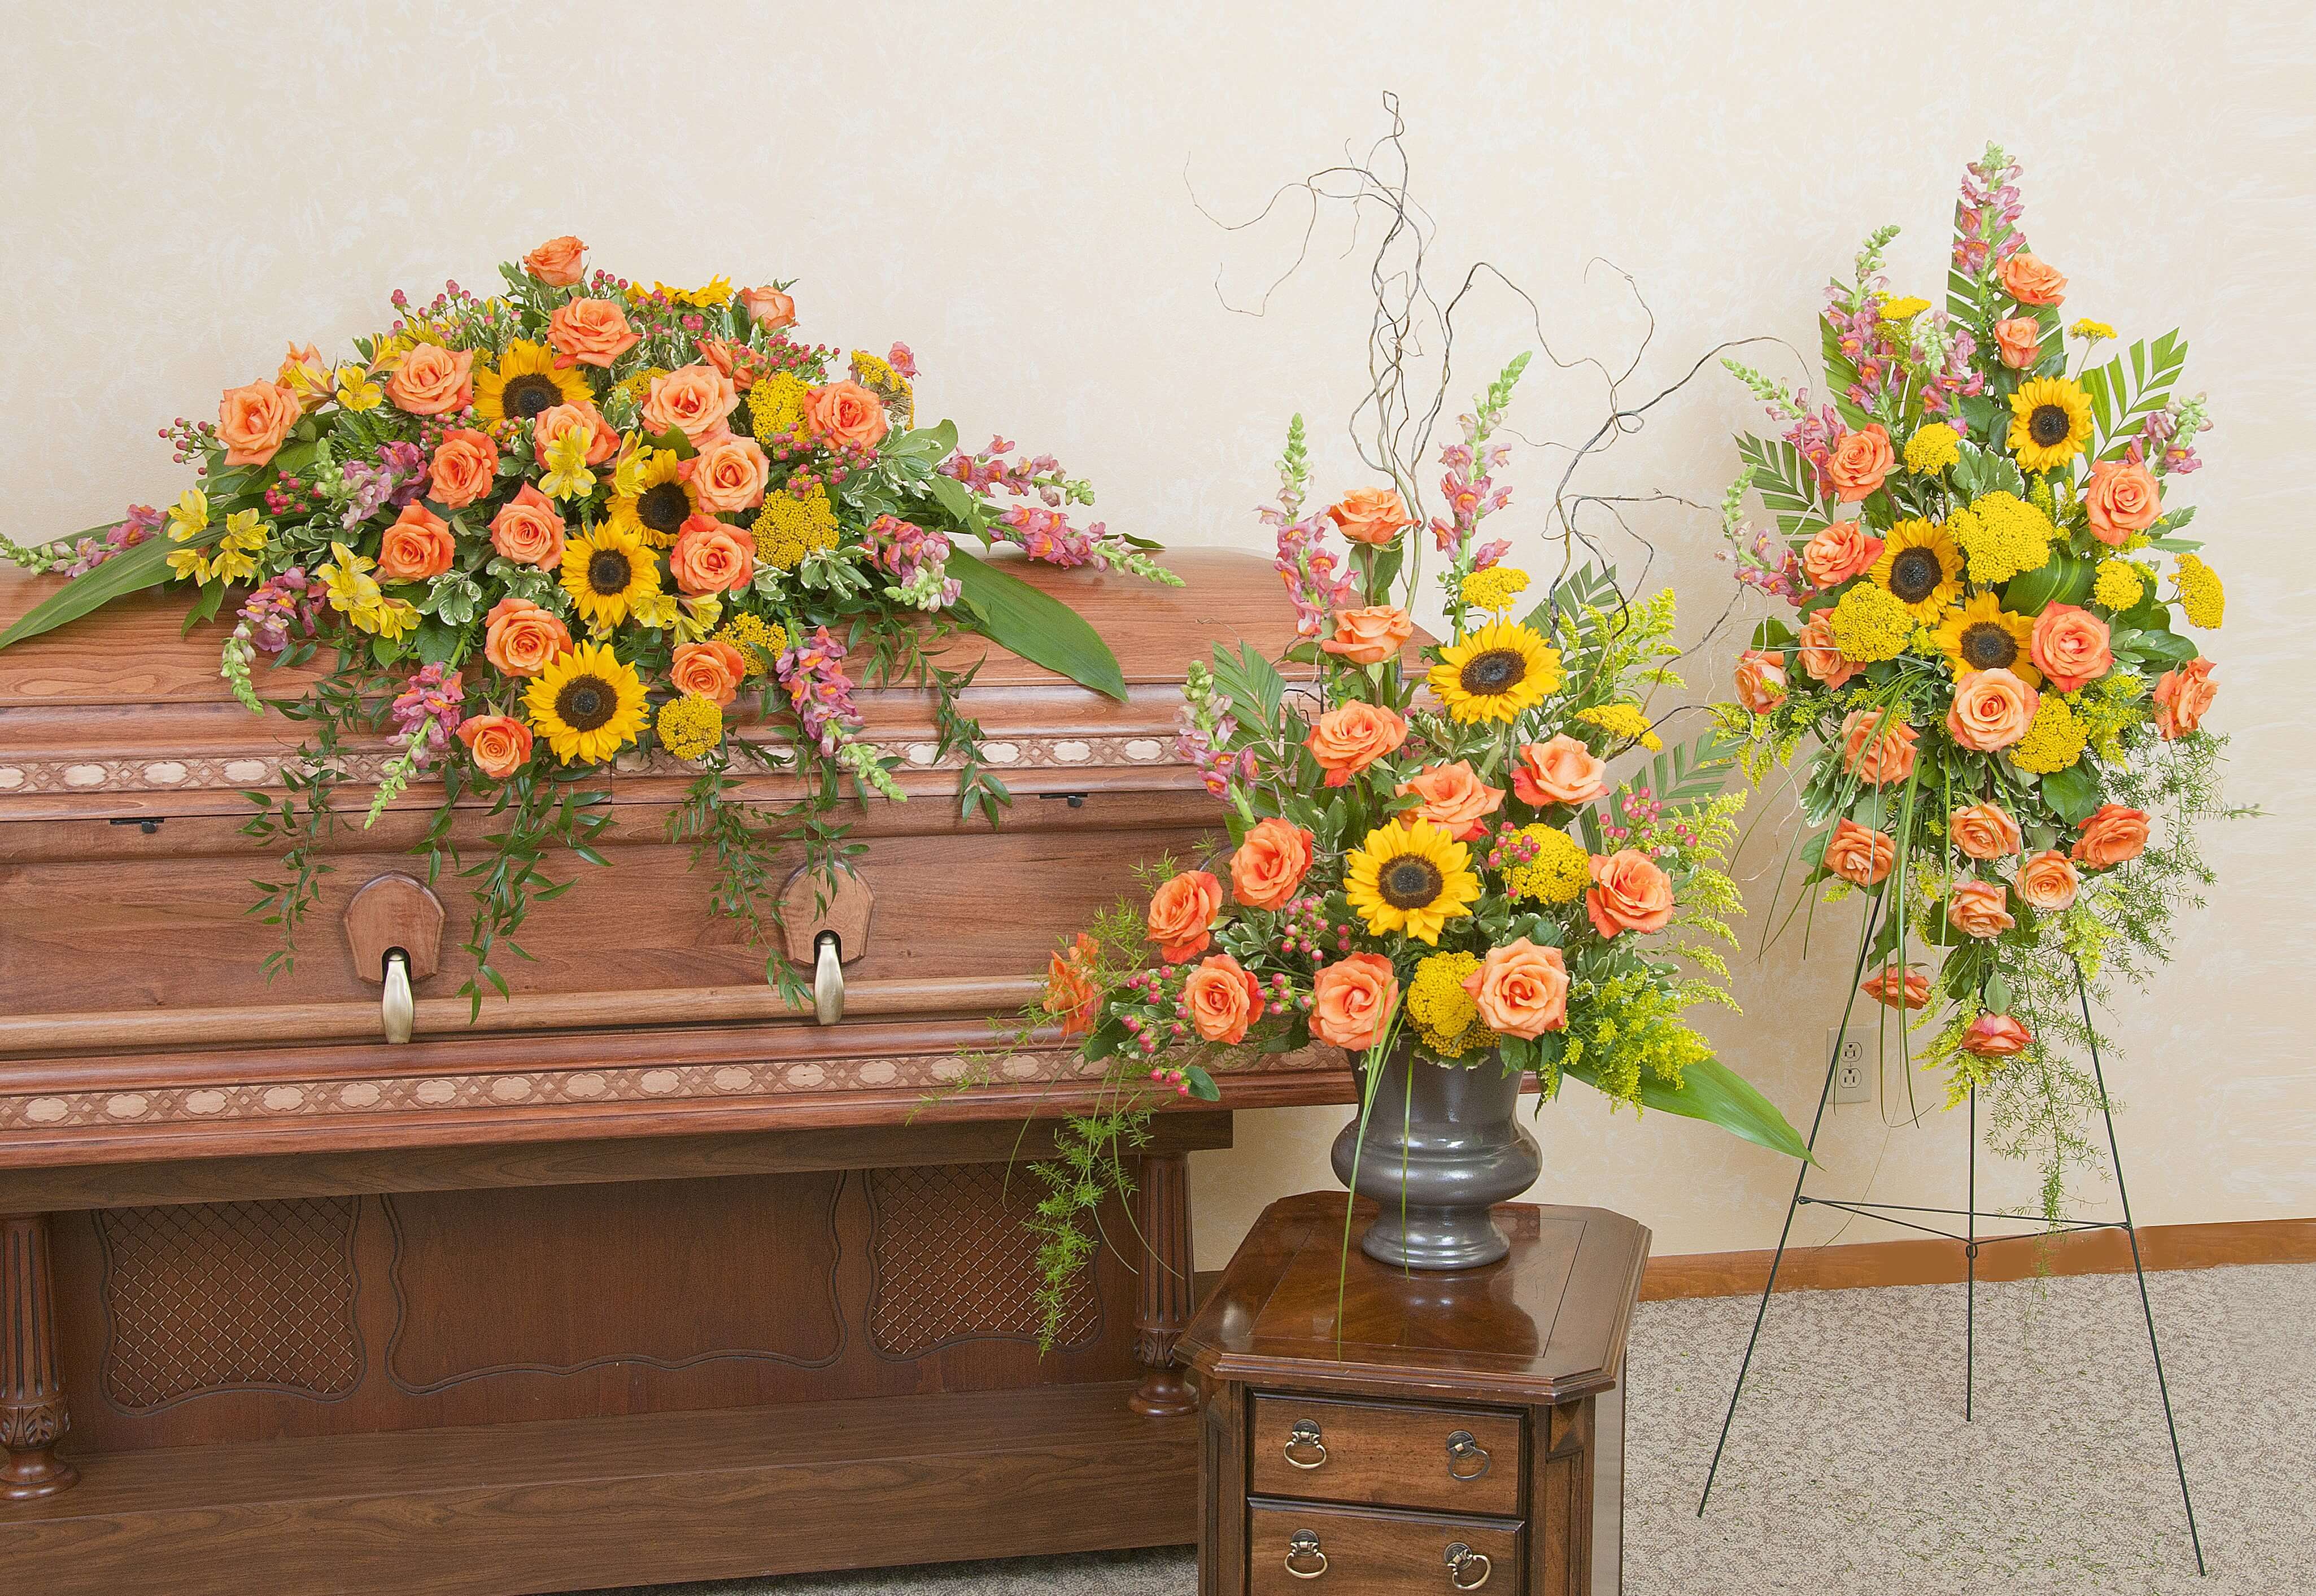 Heaven's Sunset Trio - Includes a casket spray, standing spray and urn design in the beautiful colors of a sunset.